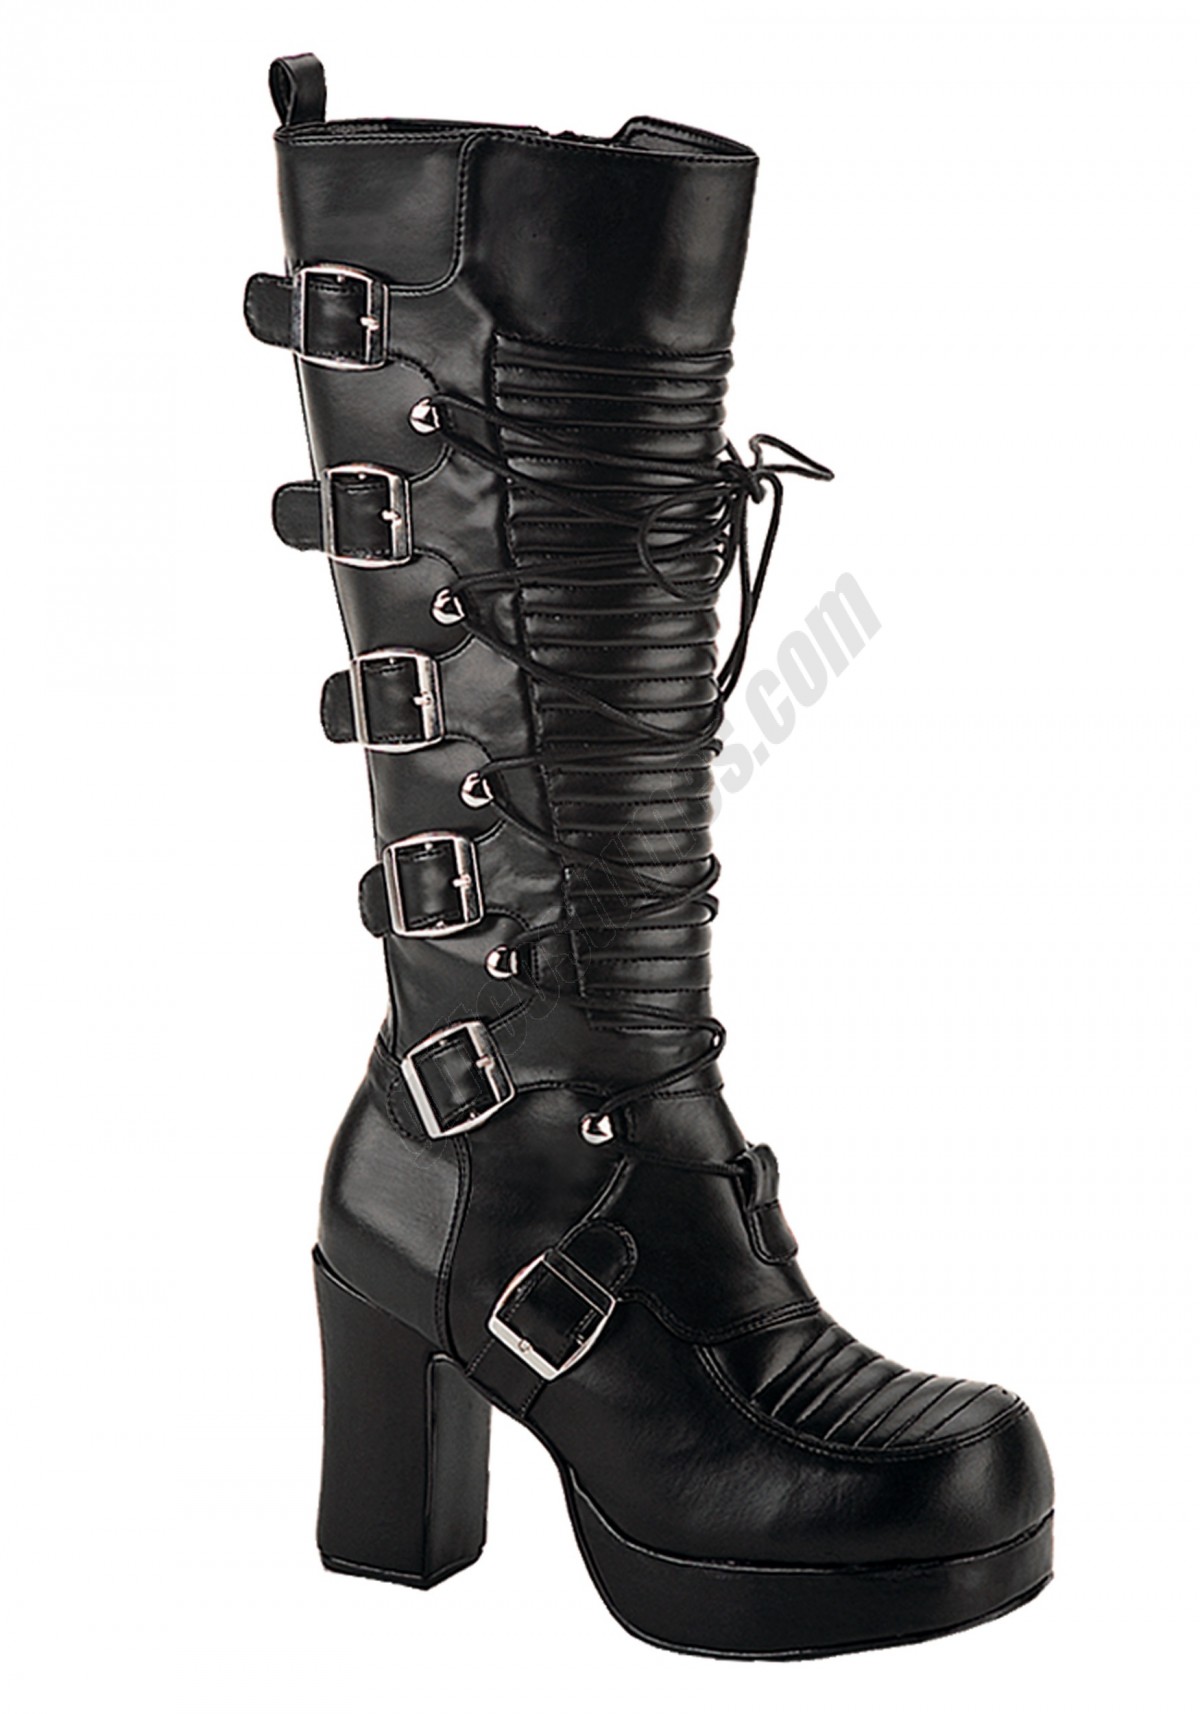 Women's Goth Boots Promotions - -0